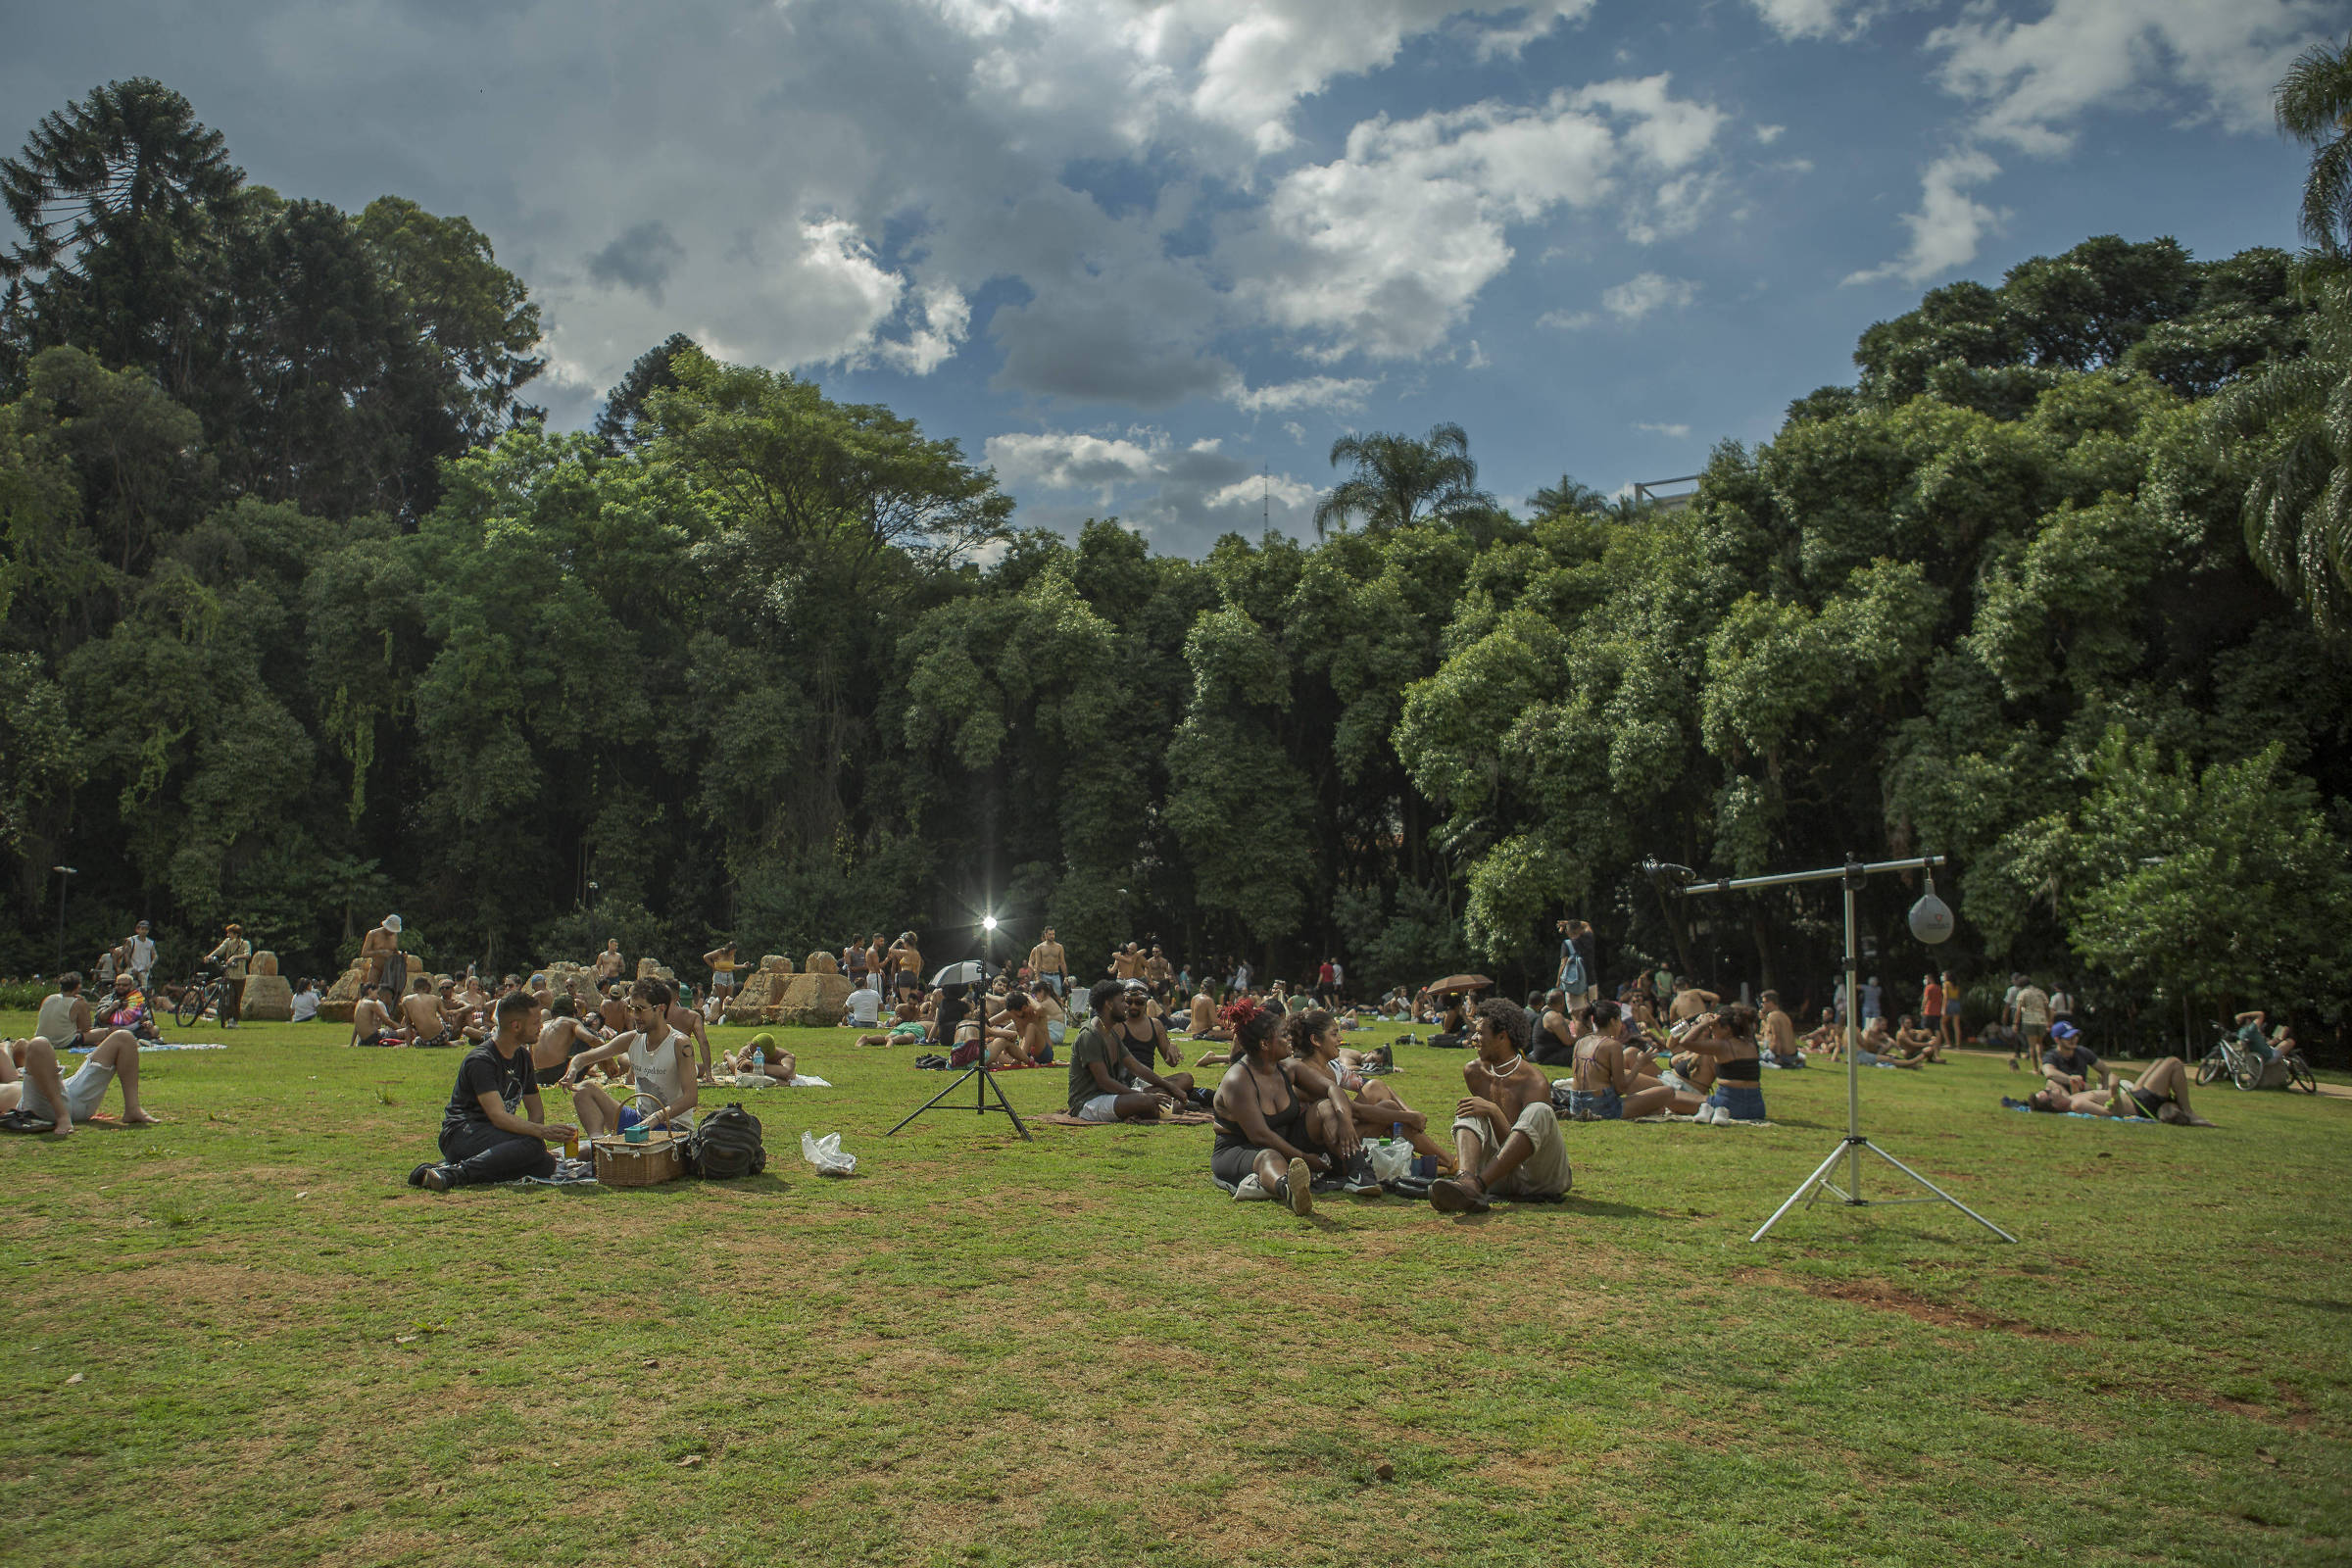 São Paulo plans 167 parks, but creates 11 in nine years – 03/24/2023 – Cotidiano